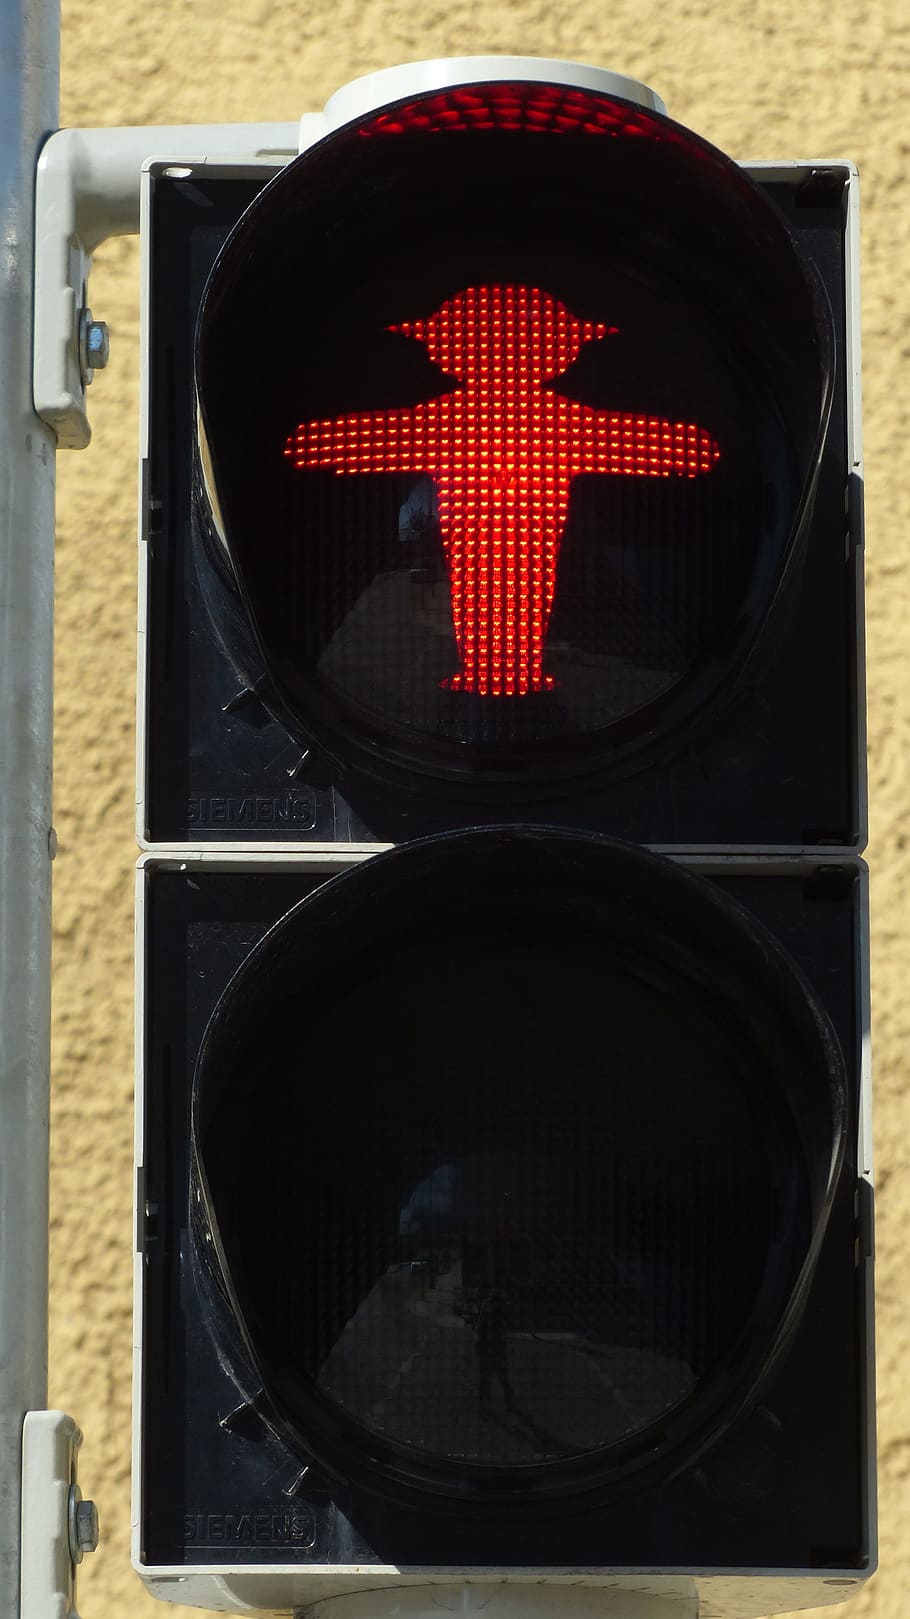 traffic lights, footbridge, Traffic Lights, Footbridge, little green man, traffic signal, red, males, light signal, foot gear males, road sign